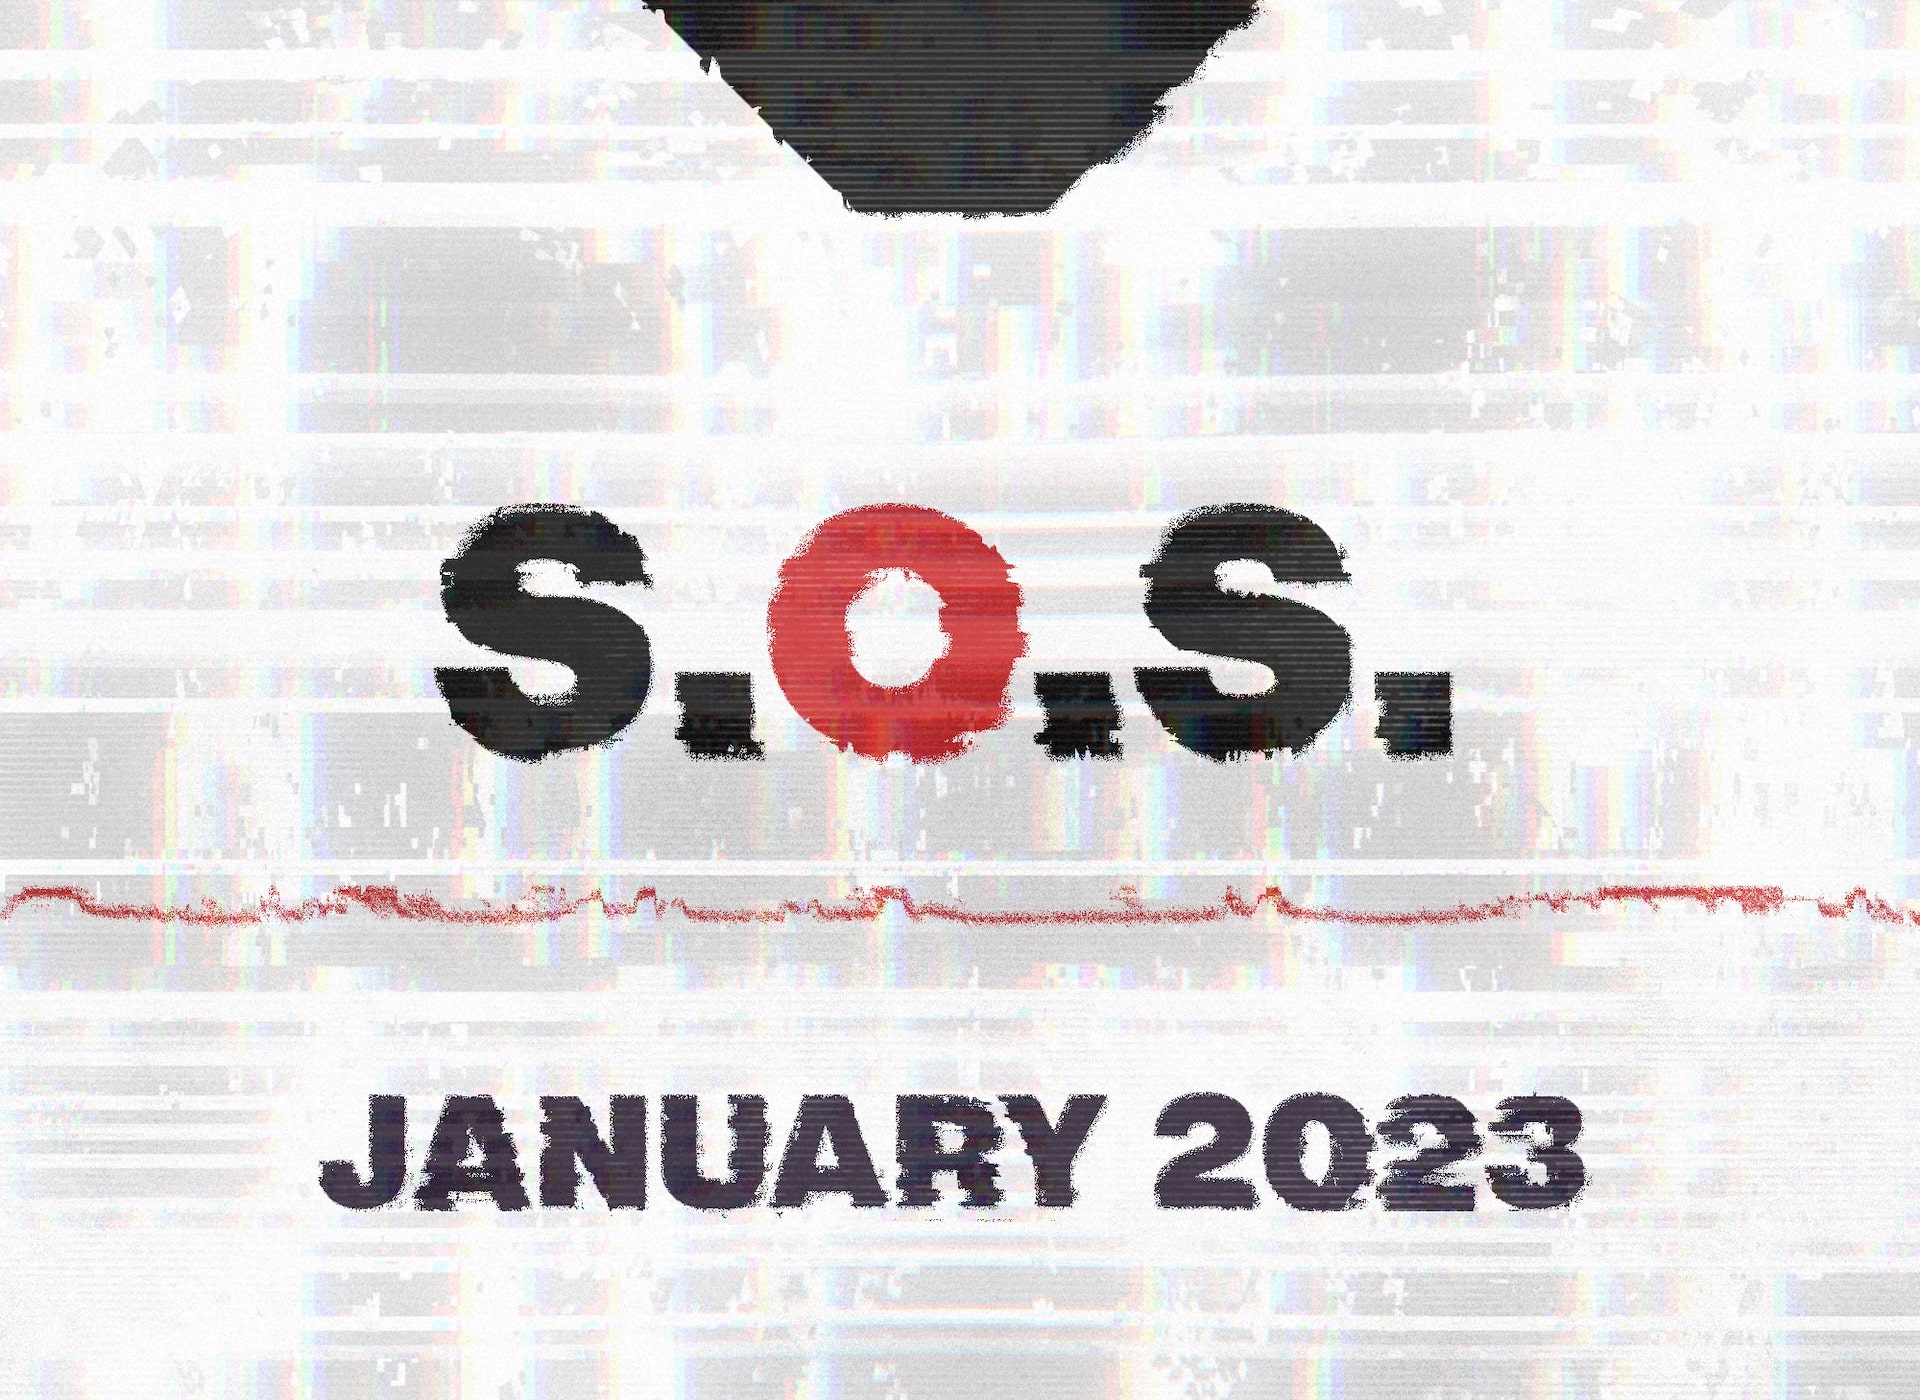 Are the X-Men in trouble? Marvel teases an S.O.S. is coming January 2023